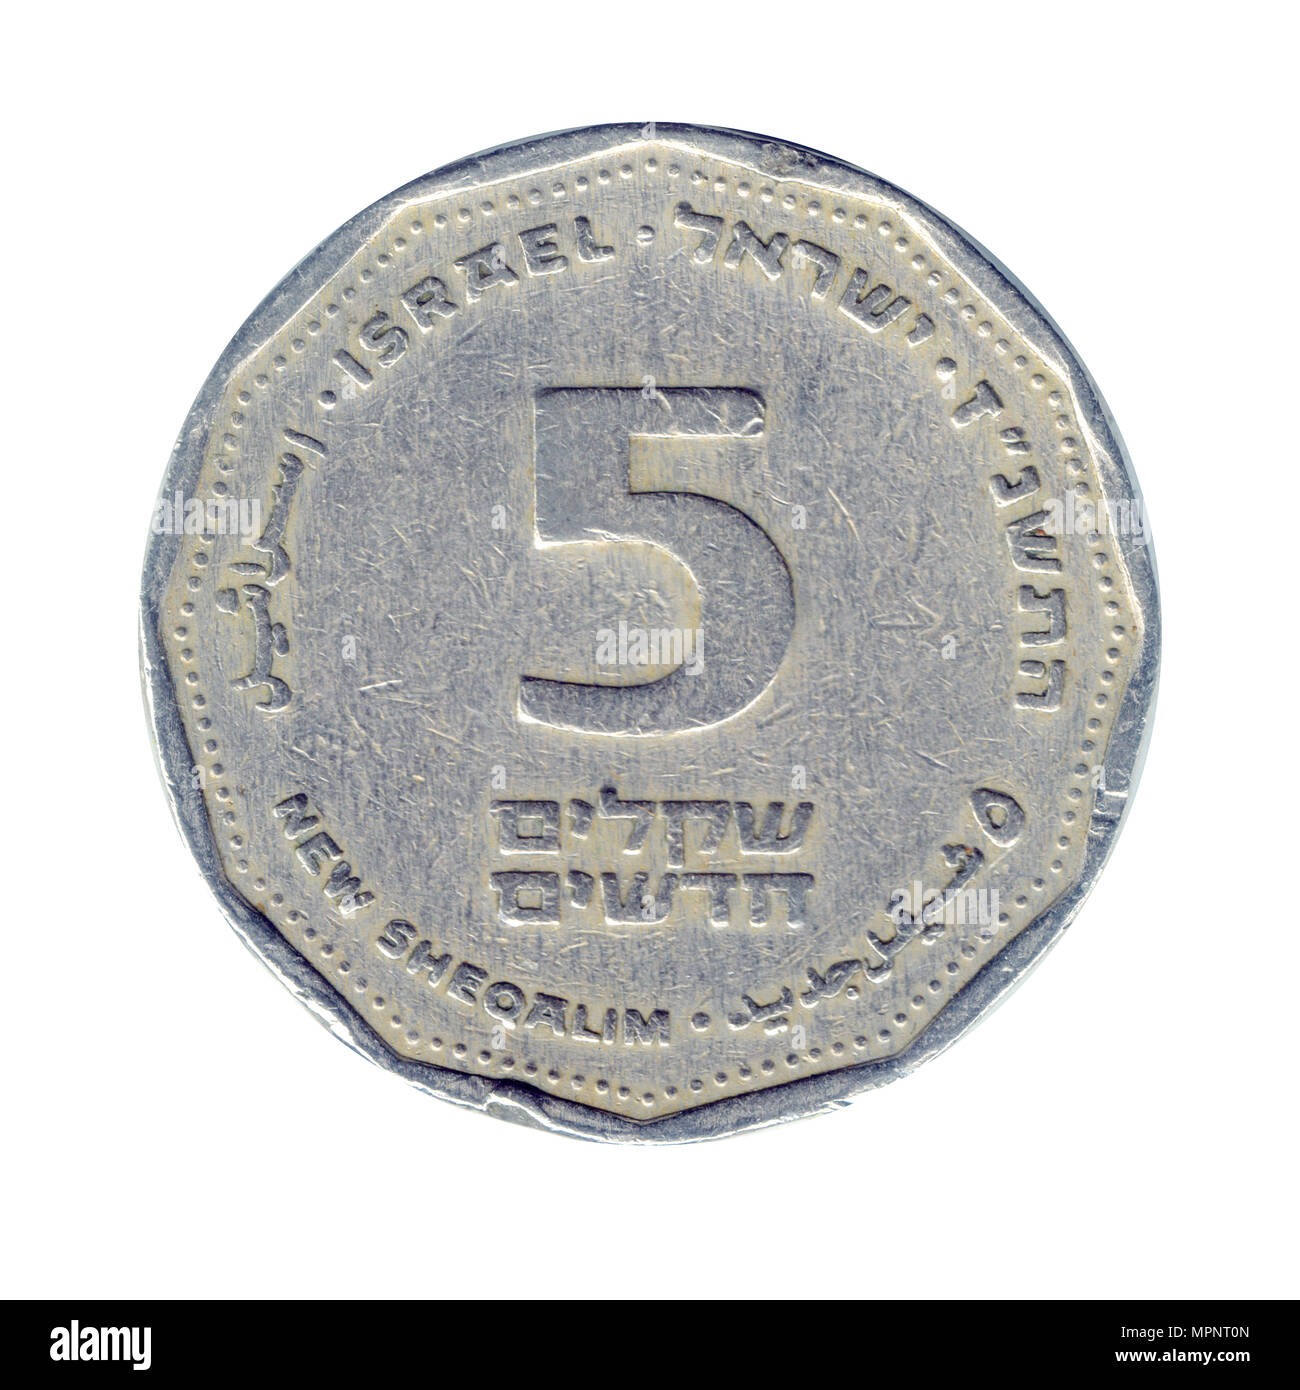 Five New Israeli Shekel coin (ILS or NIS) on white background Stock Photo